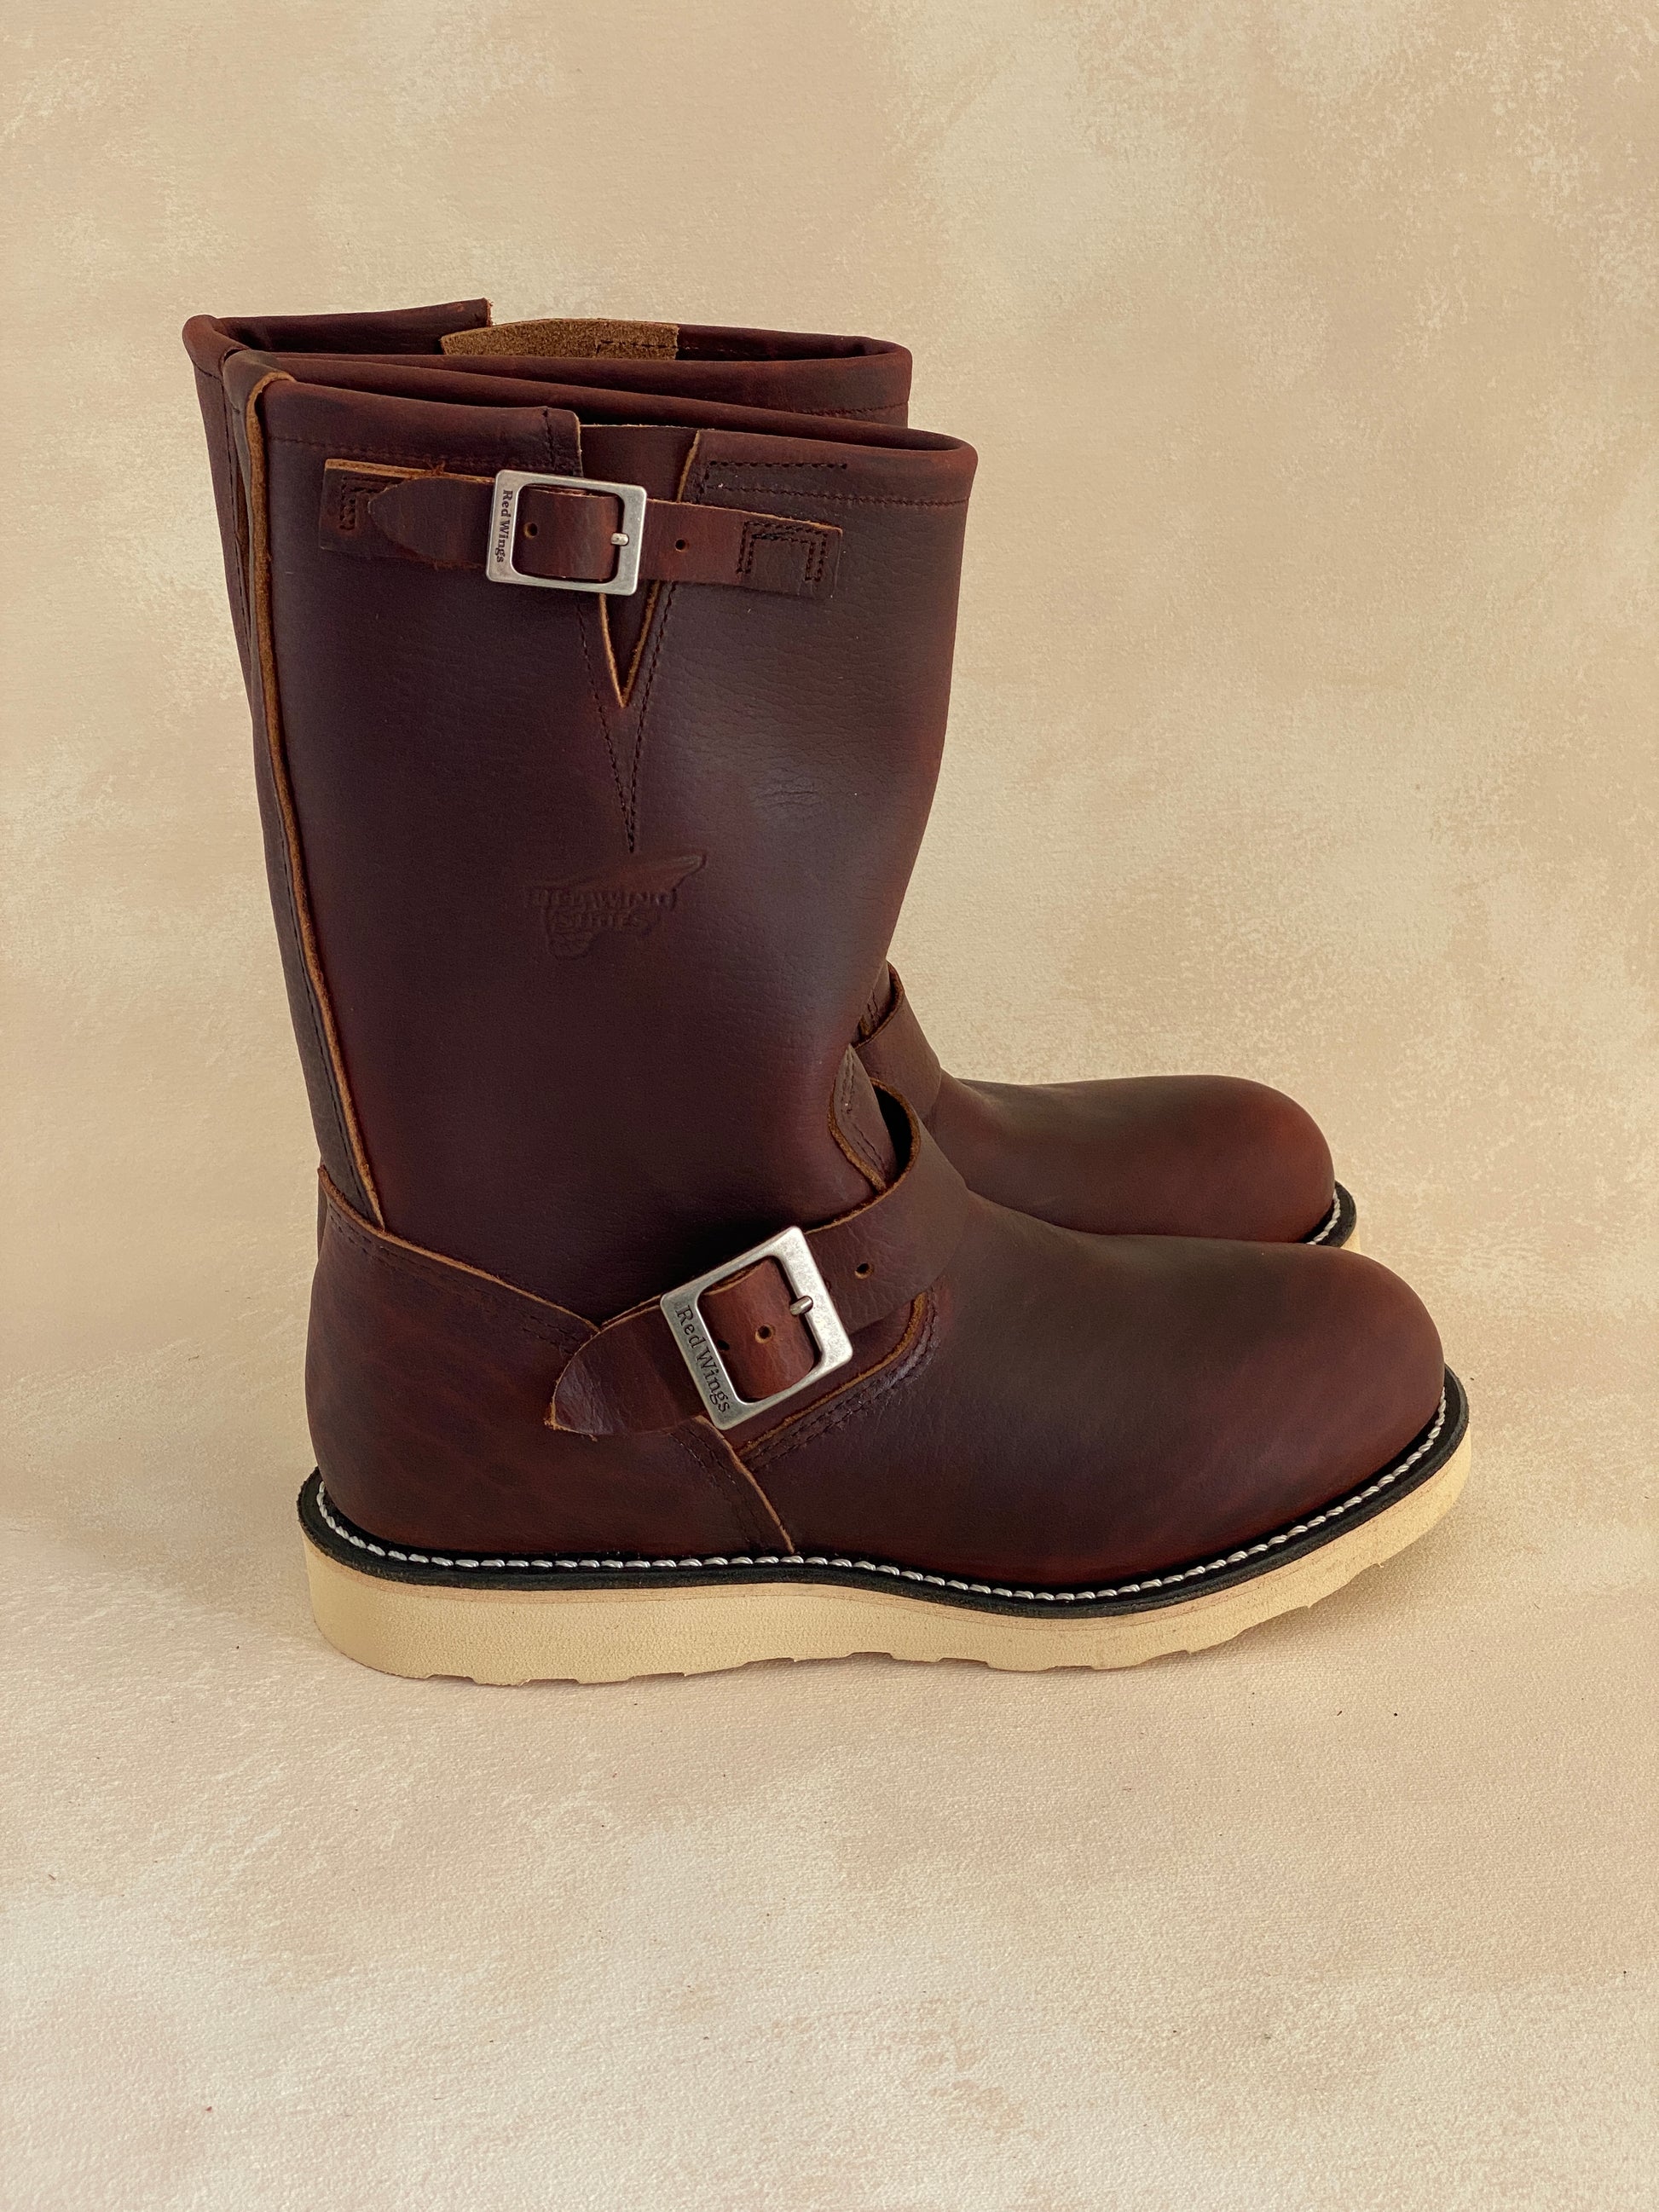 RW 2970 Heritage Engineer Boots, size 7D (39 Euro), made in the USA, seconds quality.